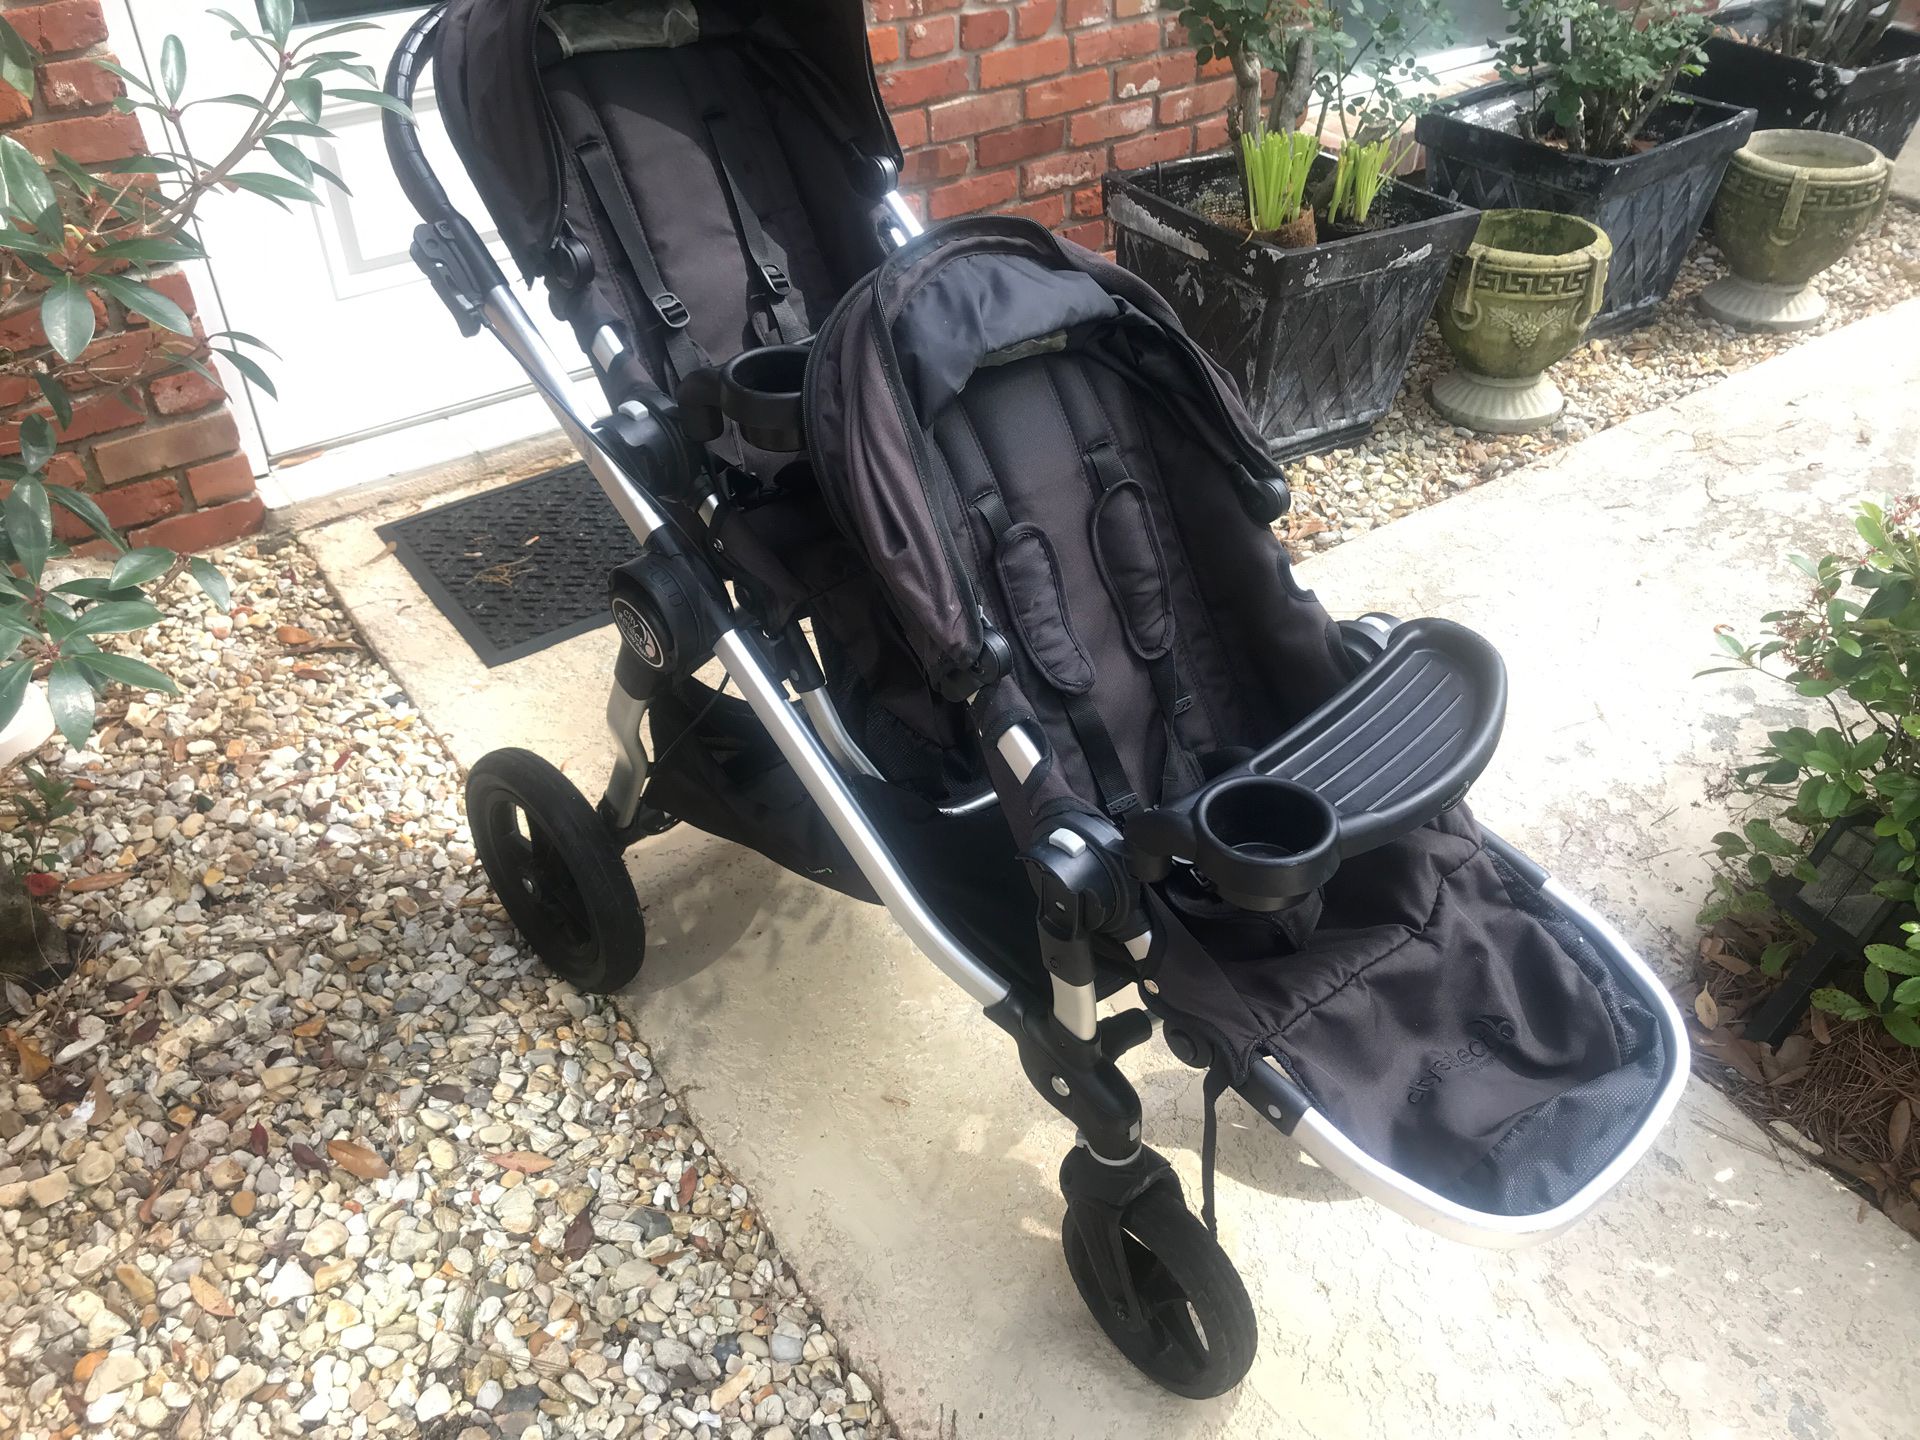 Baby Jogger City Select double stroller